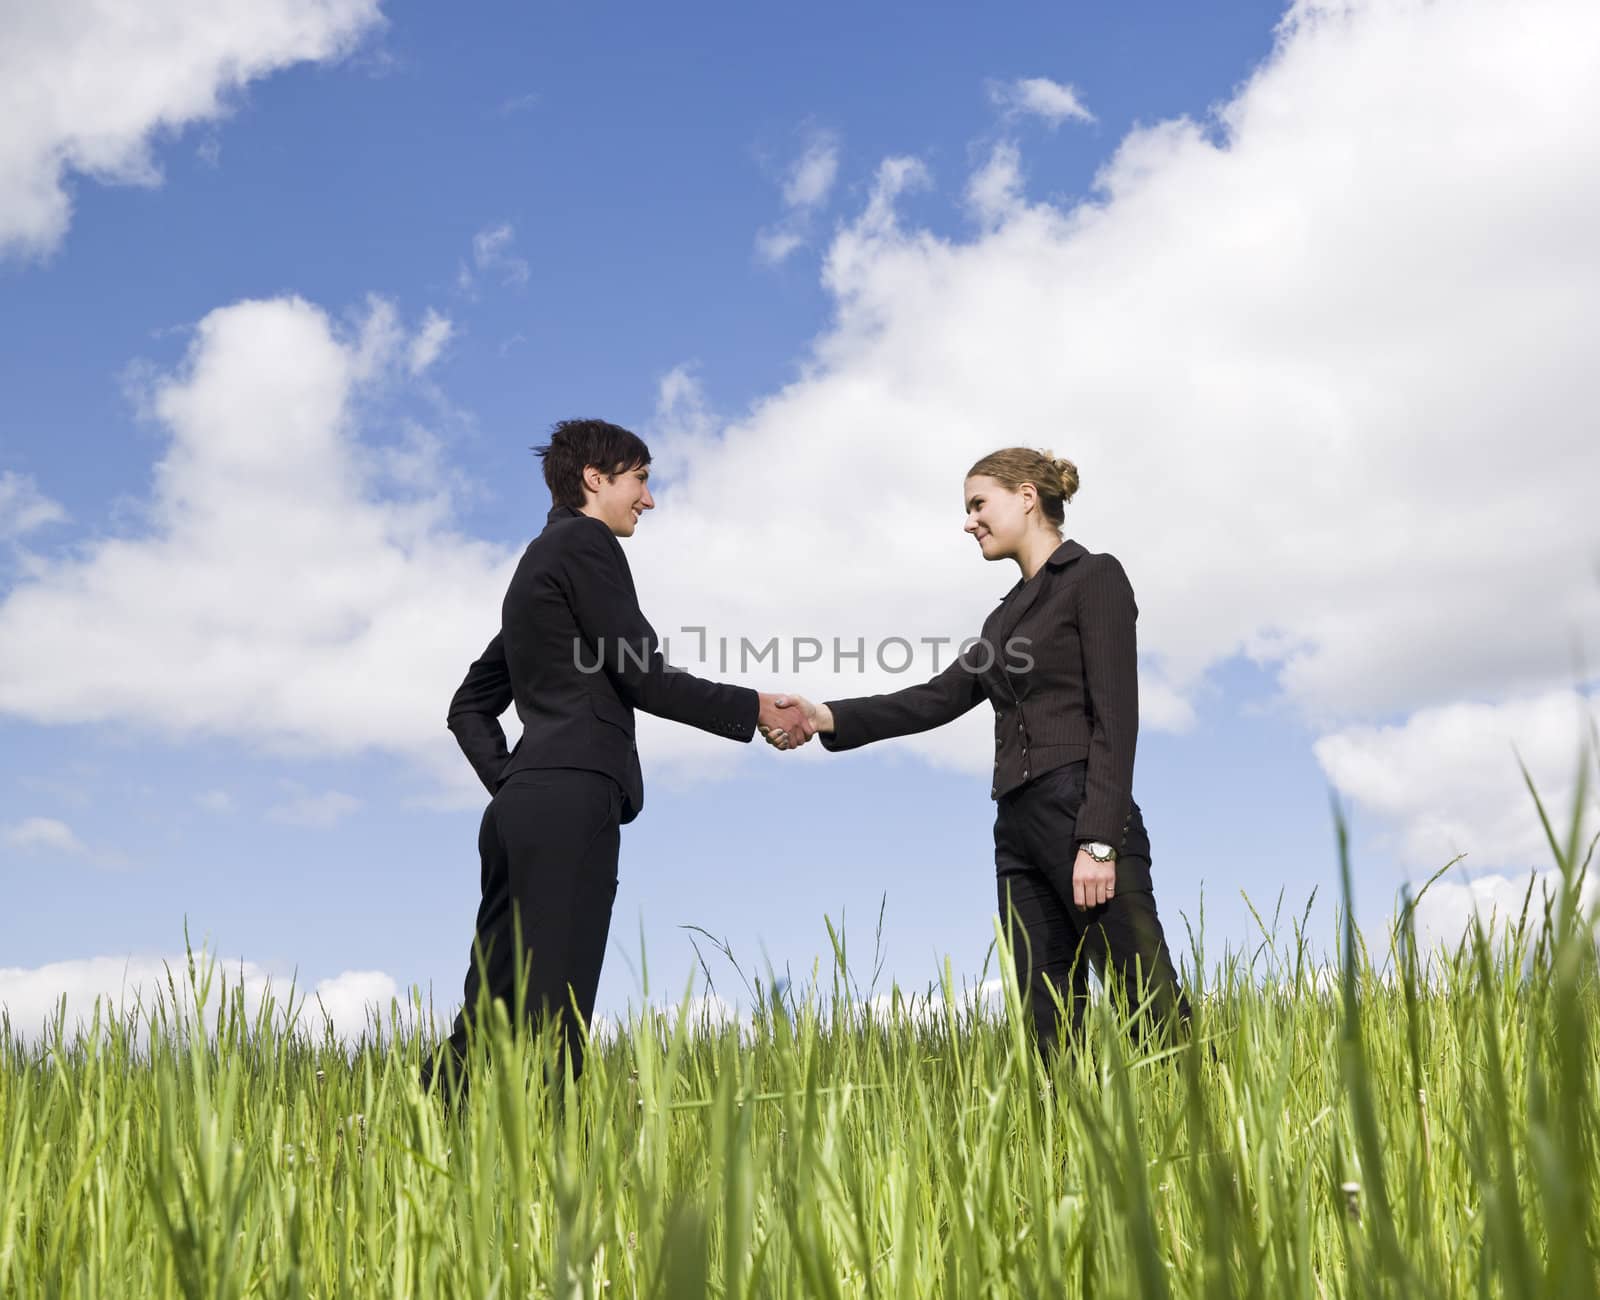 Two women standing in the grass shaking hands